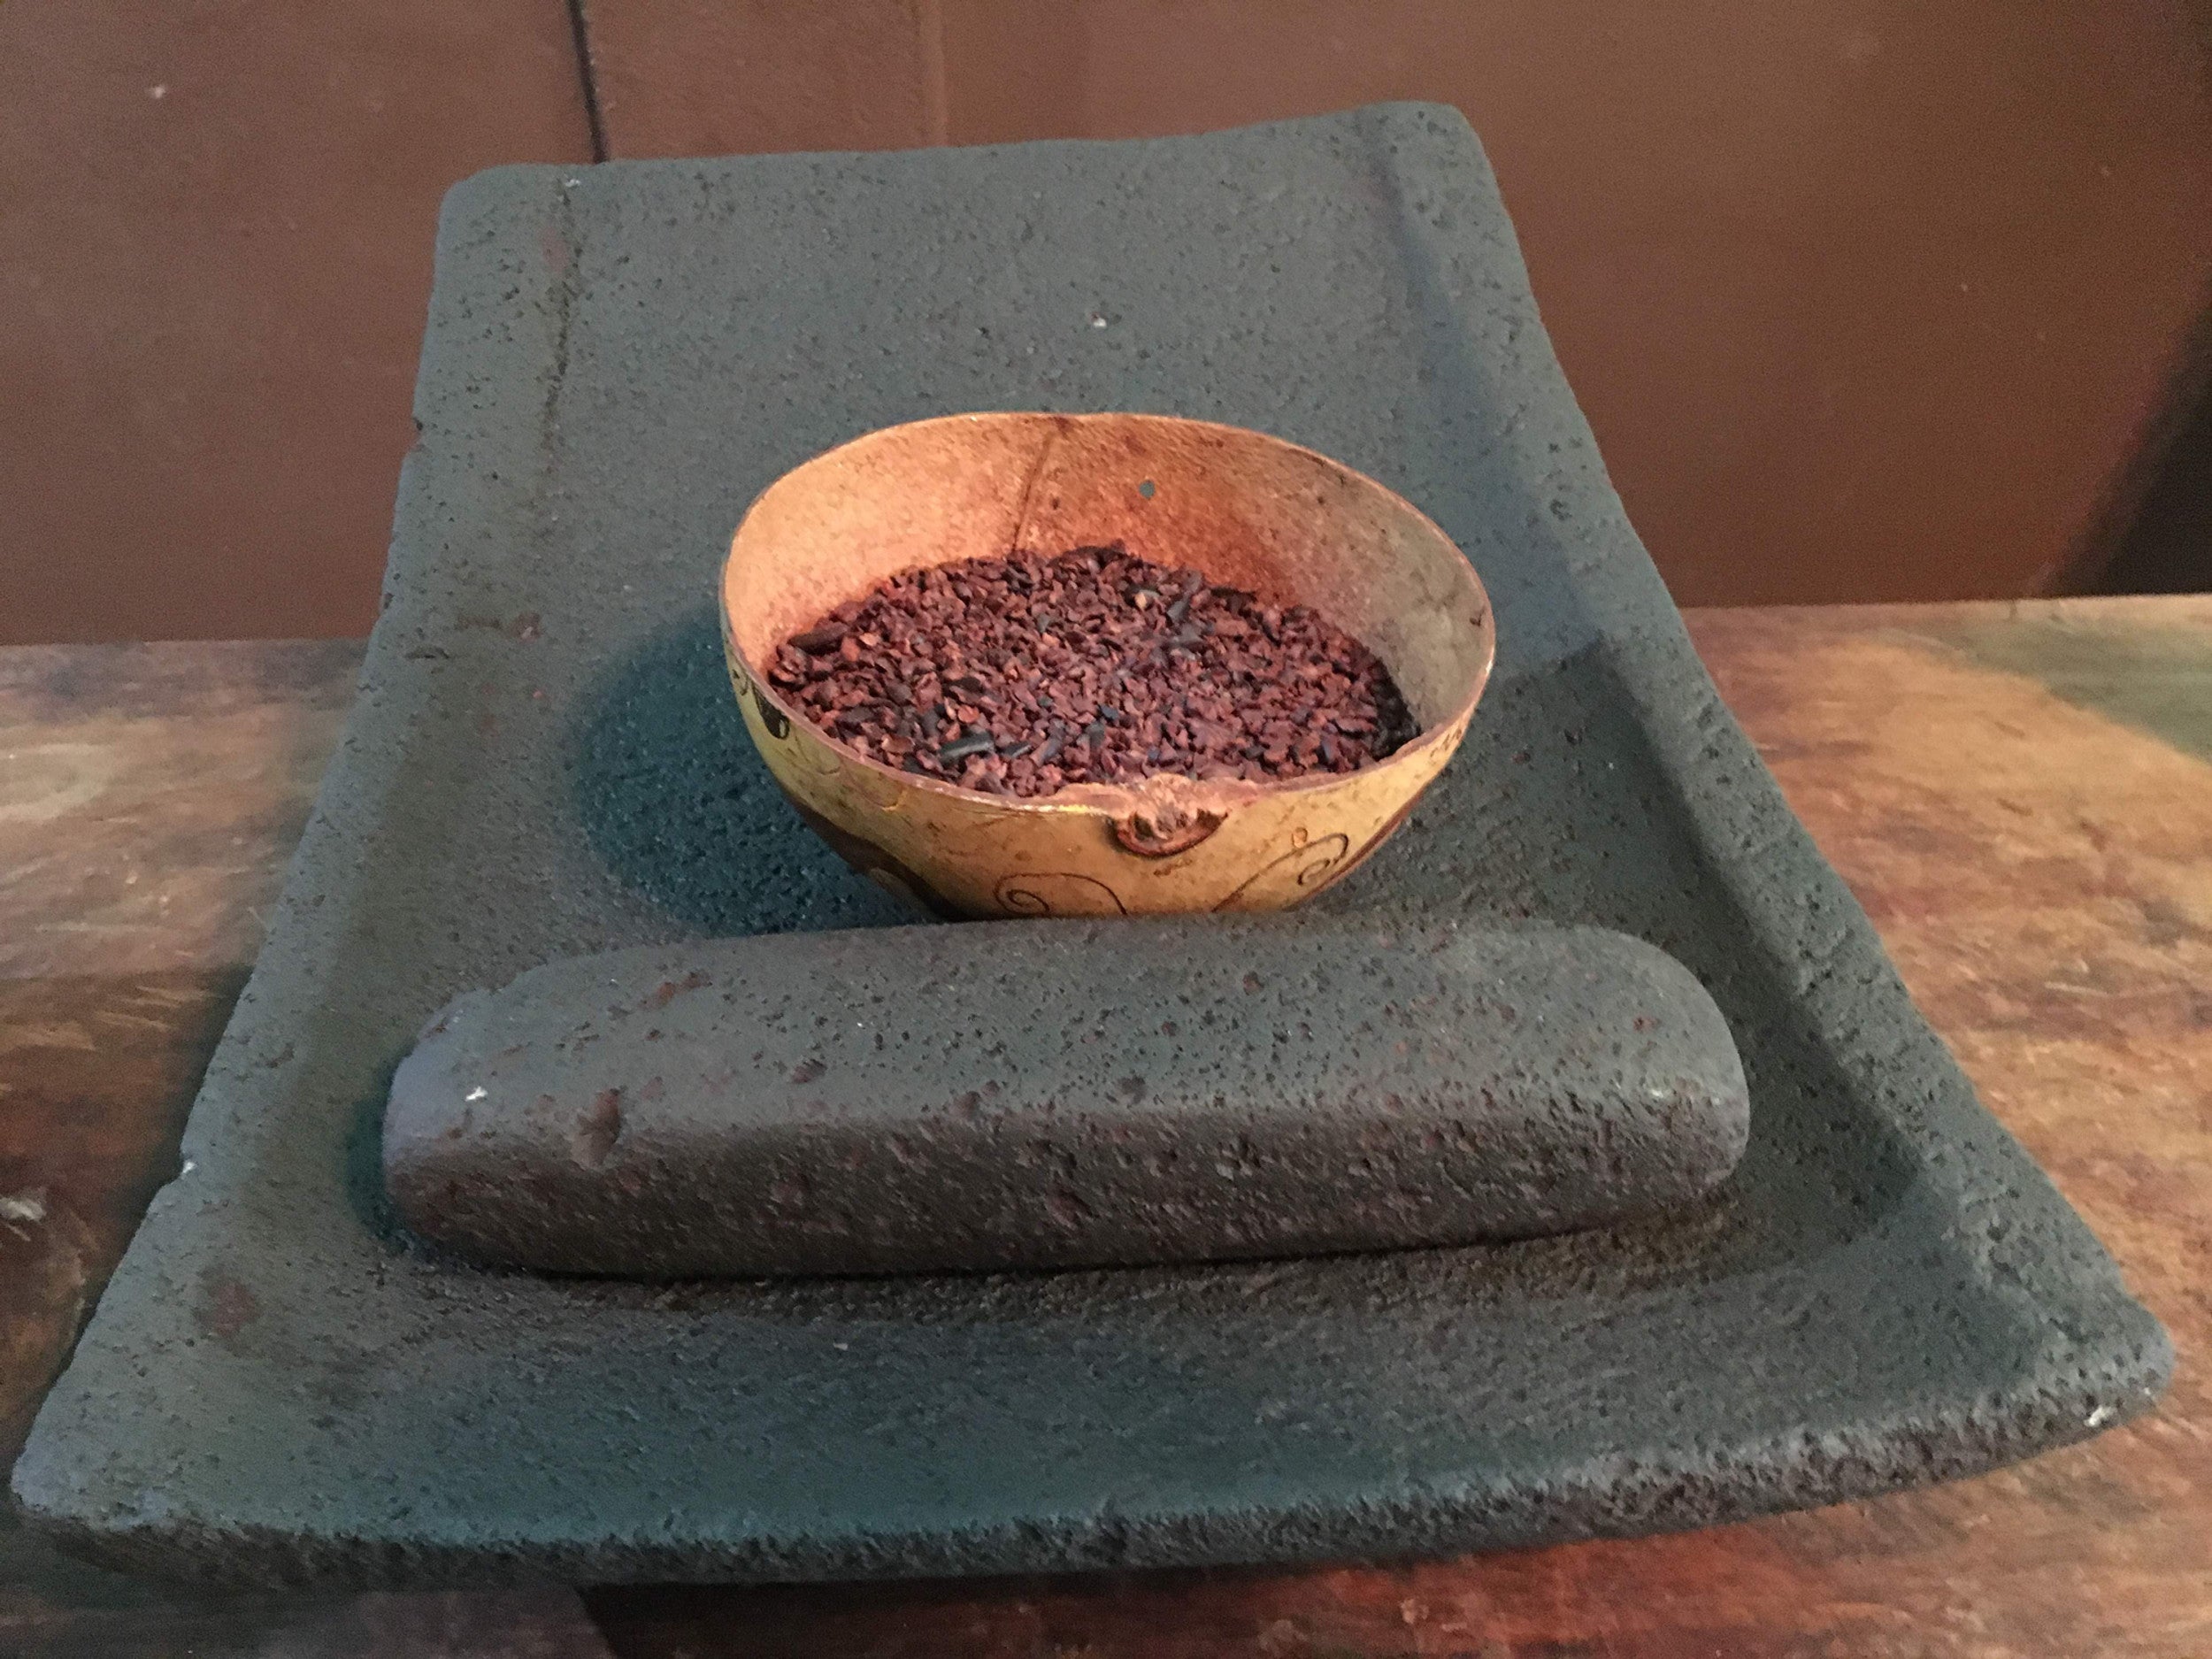 Cacao beans being prepared on a traditional Mayan cookset